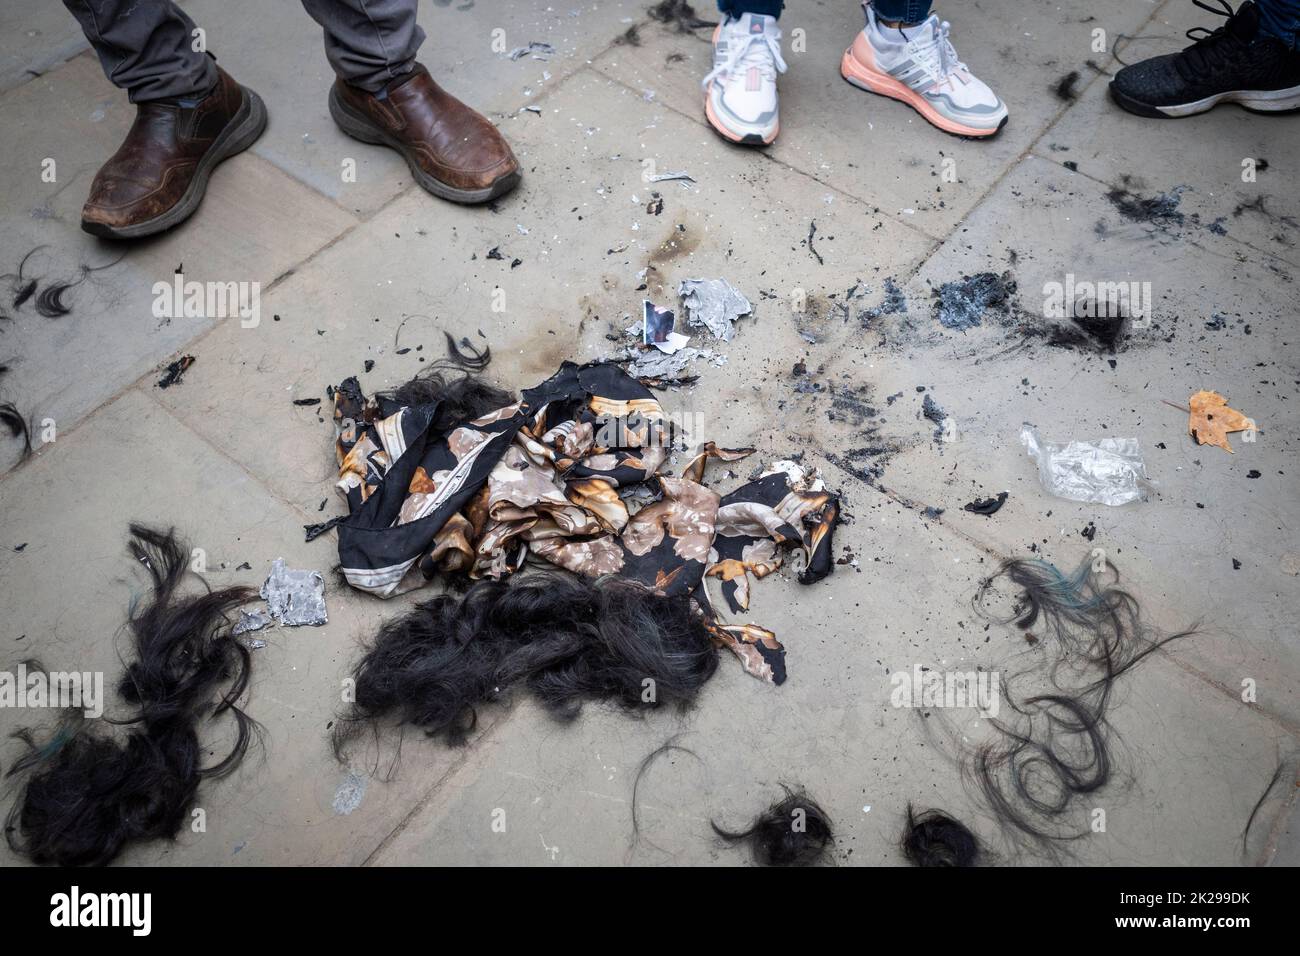 London, UK.  22 September 2022.  A hijab burned next to hair from shaved heads during a protest in Parliament Square by Iranians living in London reacting to news of the death, on 16 September of Mahsa Amini, a 22-year-old Kurdish woman, who died in police custody in Tehran.  Allegedly, she had been detained by Iran’s morality police for wearing a hijab headscarf in an “improper” way.  Protests are taking place in Iran and the access to the internet and social media is now being restricted. Credit: Stephen Chung / Alamy Live News Stock Photo